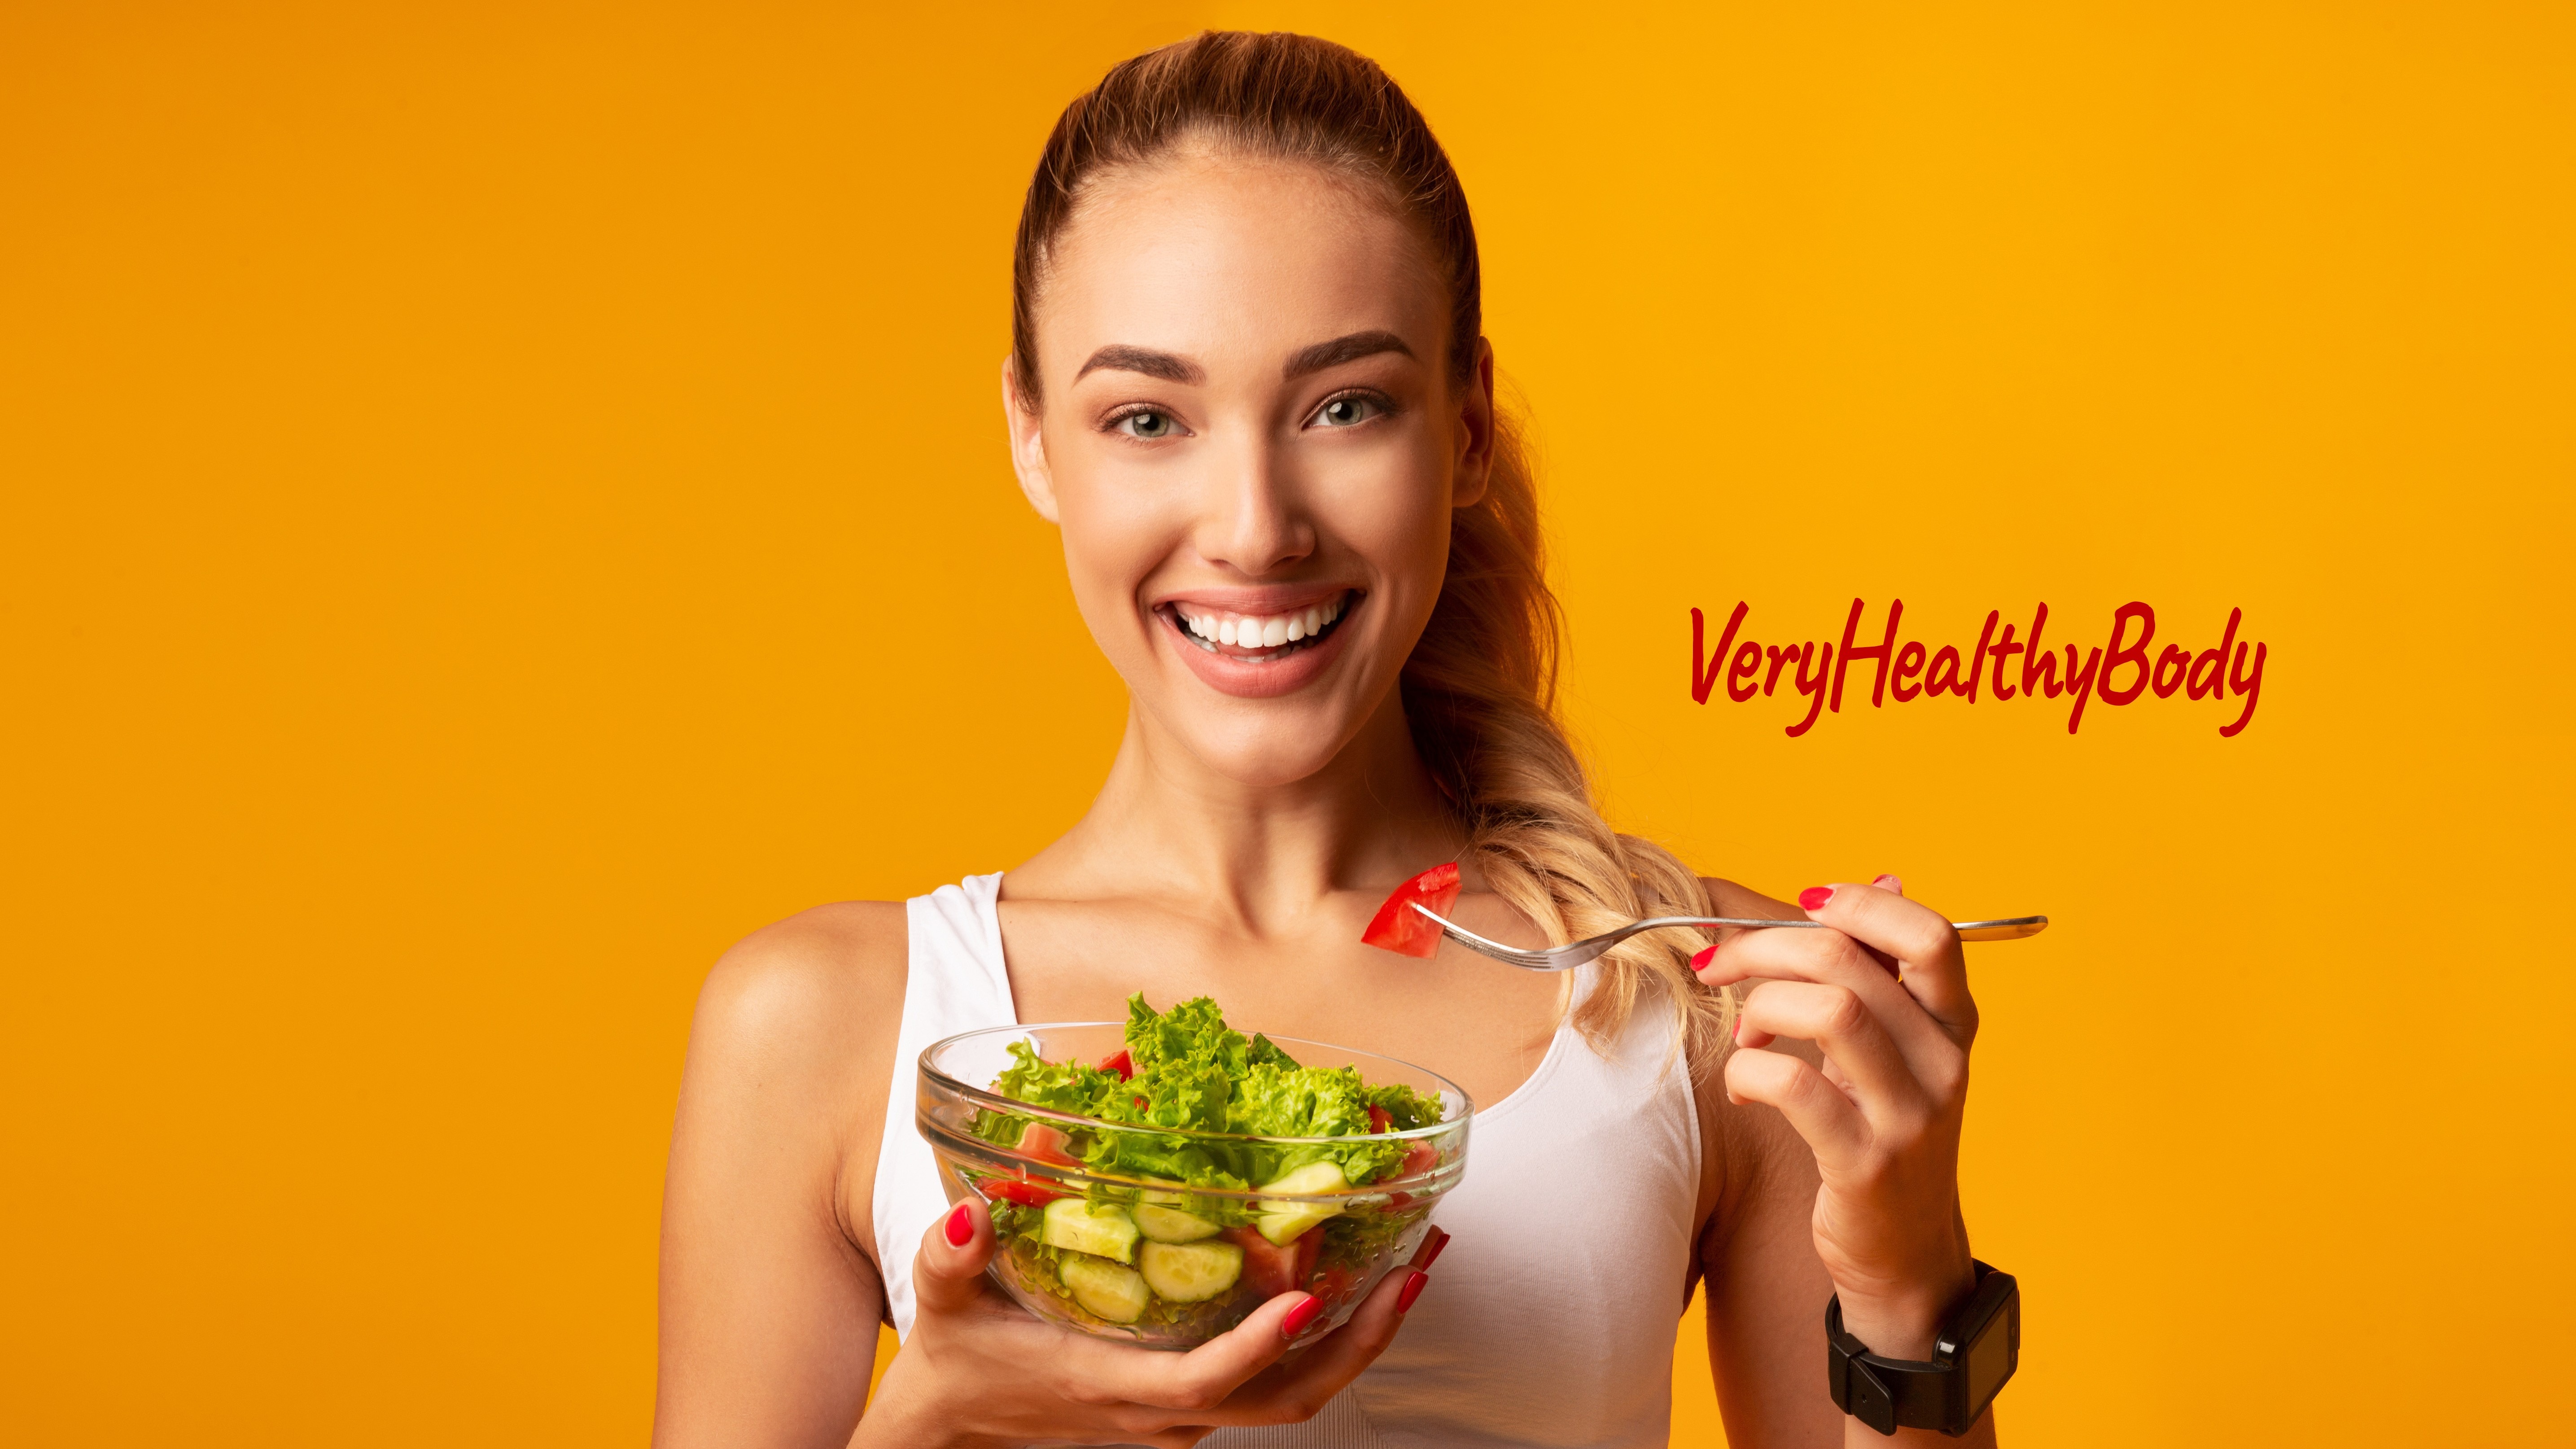 VeryHealthyBody.com to Provide Nutrition Focused Health and Wellness Resources